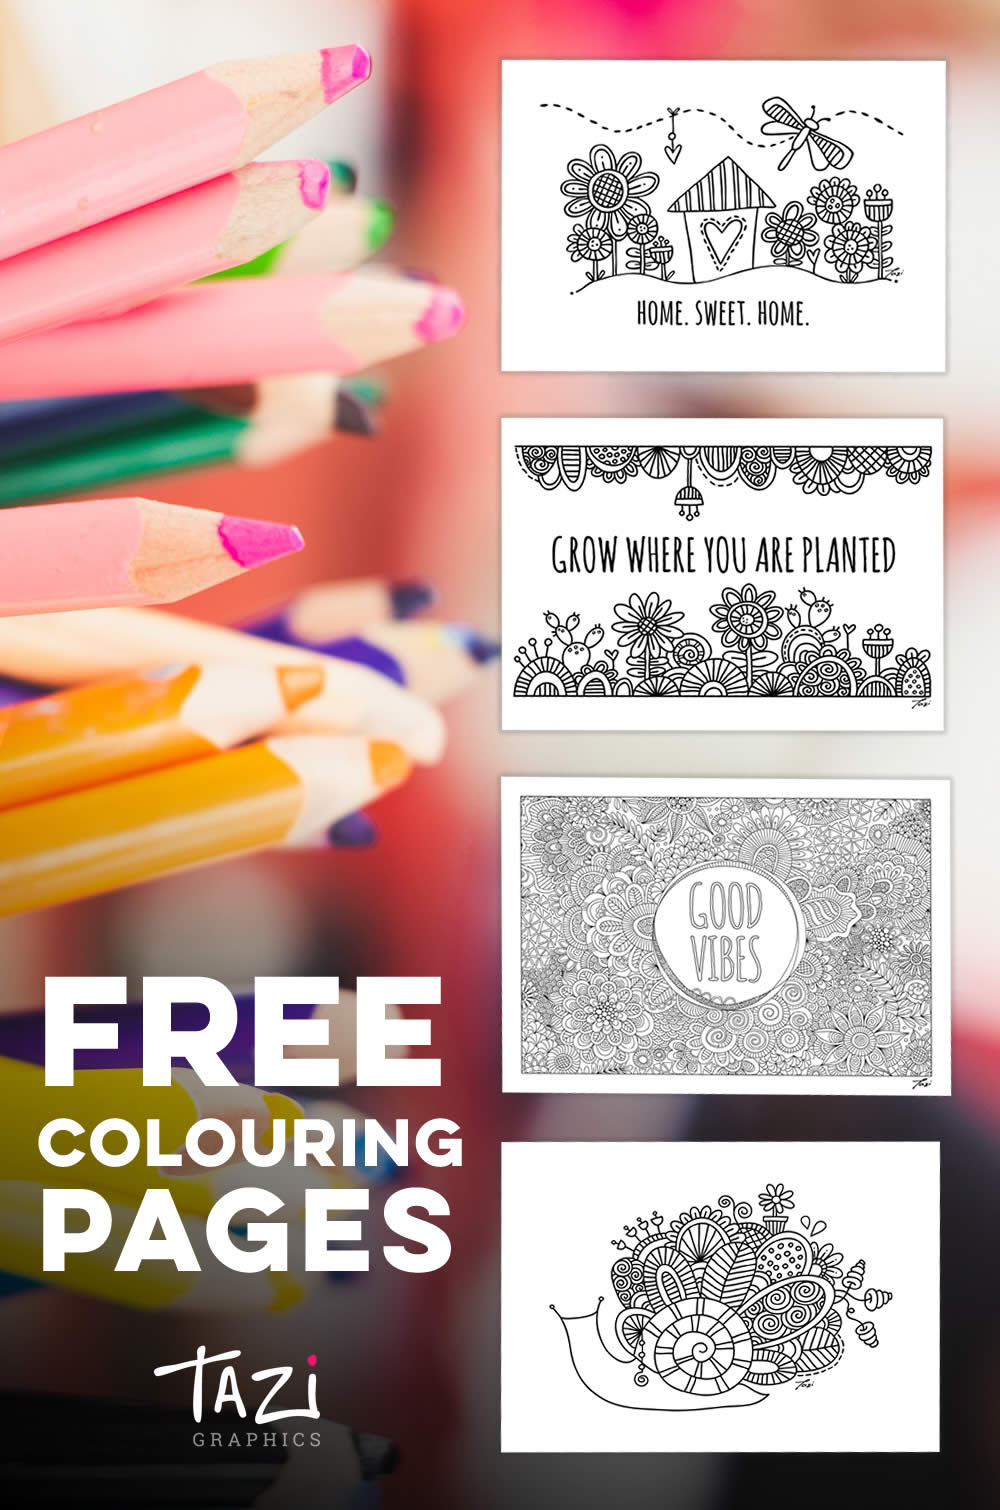 Tazi free-colouring-pages